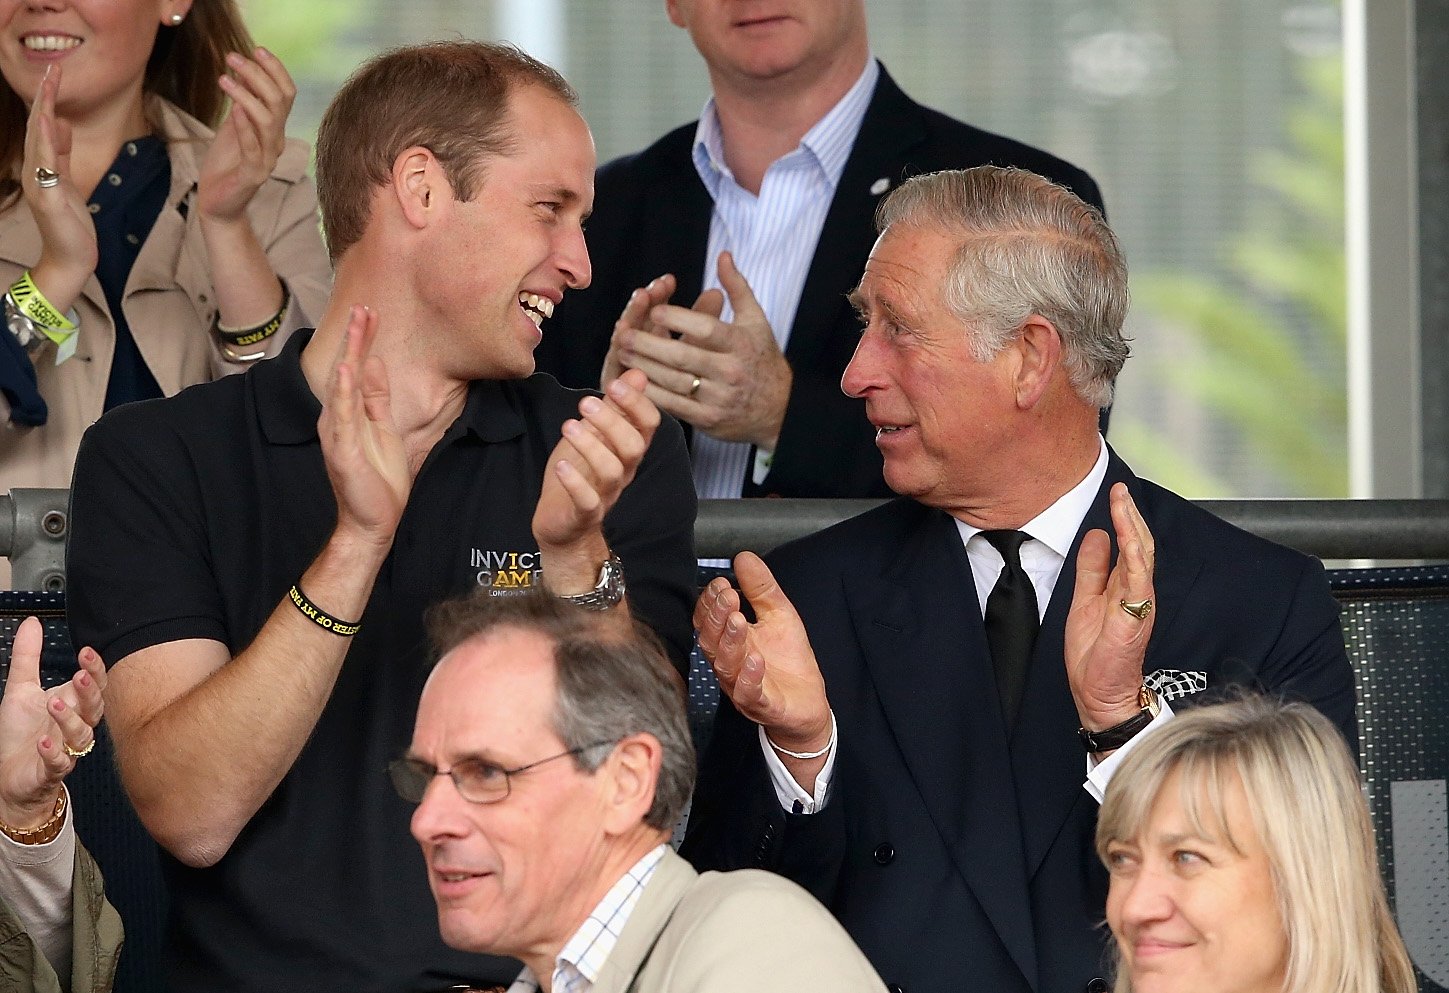 Prince William and Prince Charles during the Invictus Games at Lee Valley on September 11, 2014, in London, England | Source: Getty Images